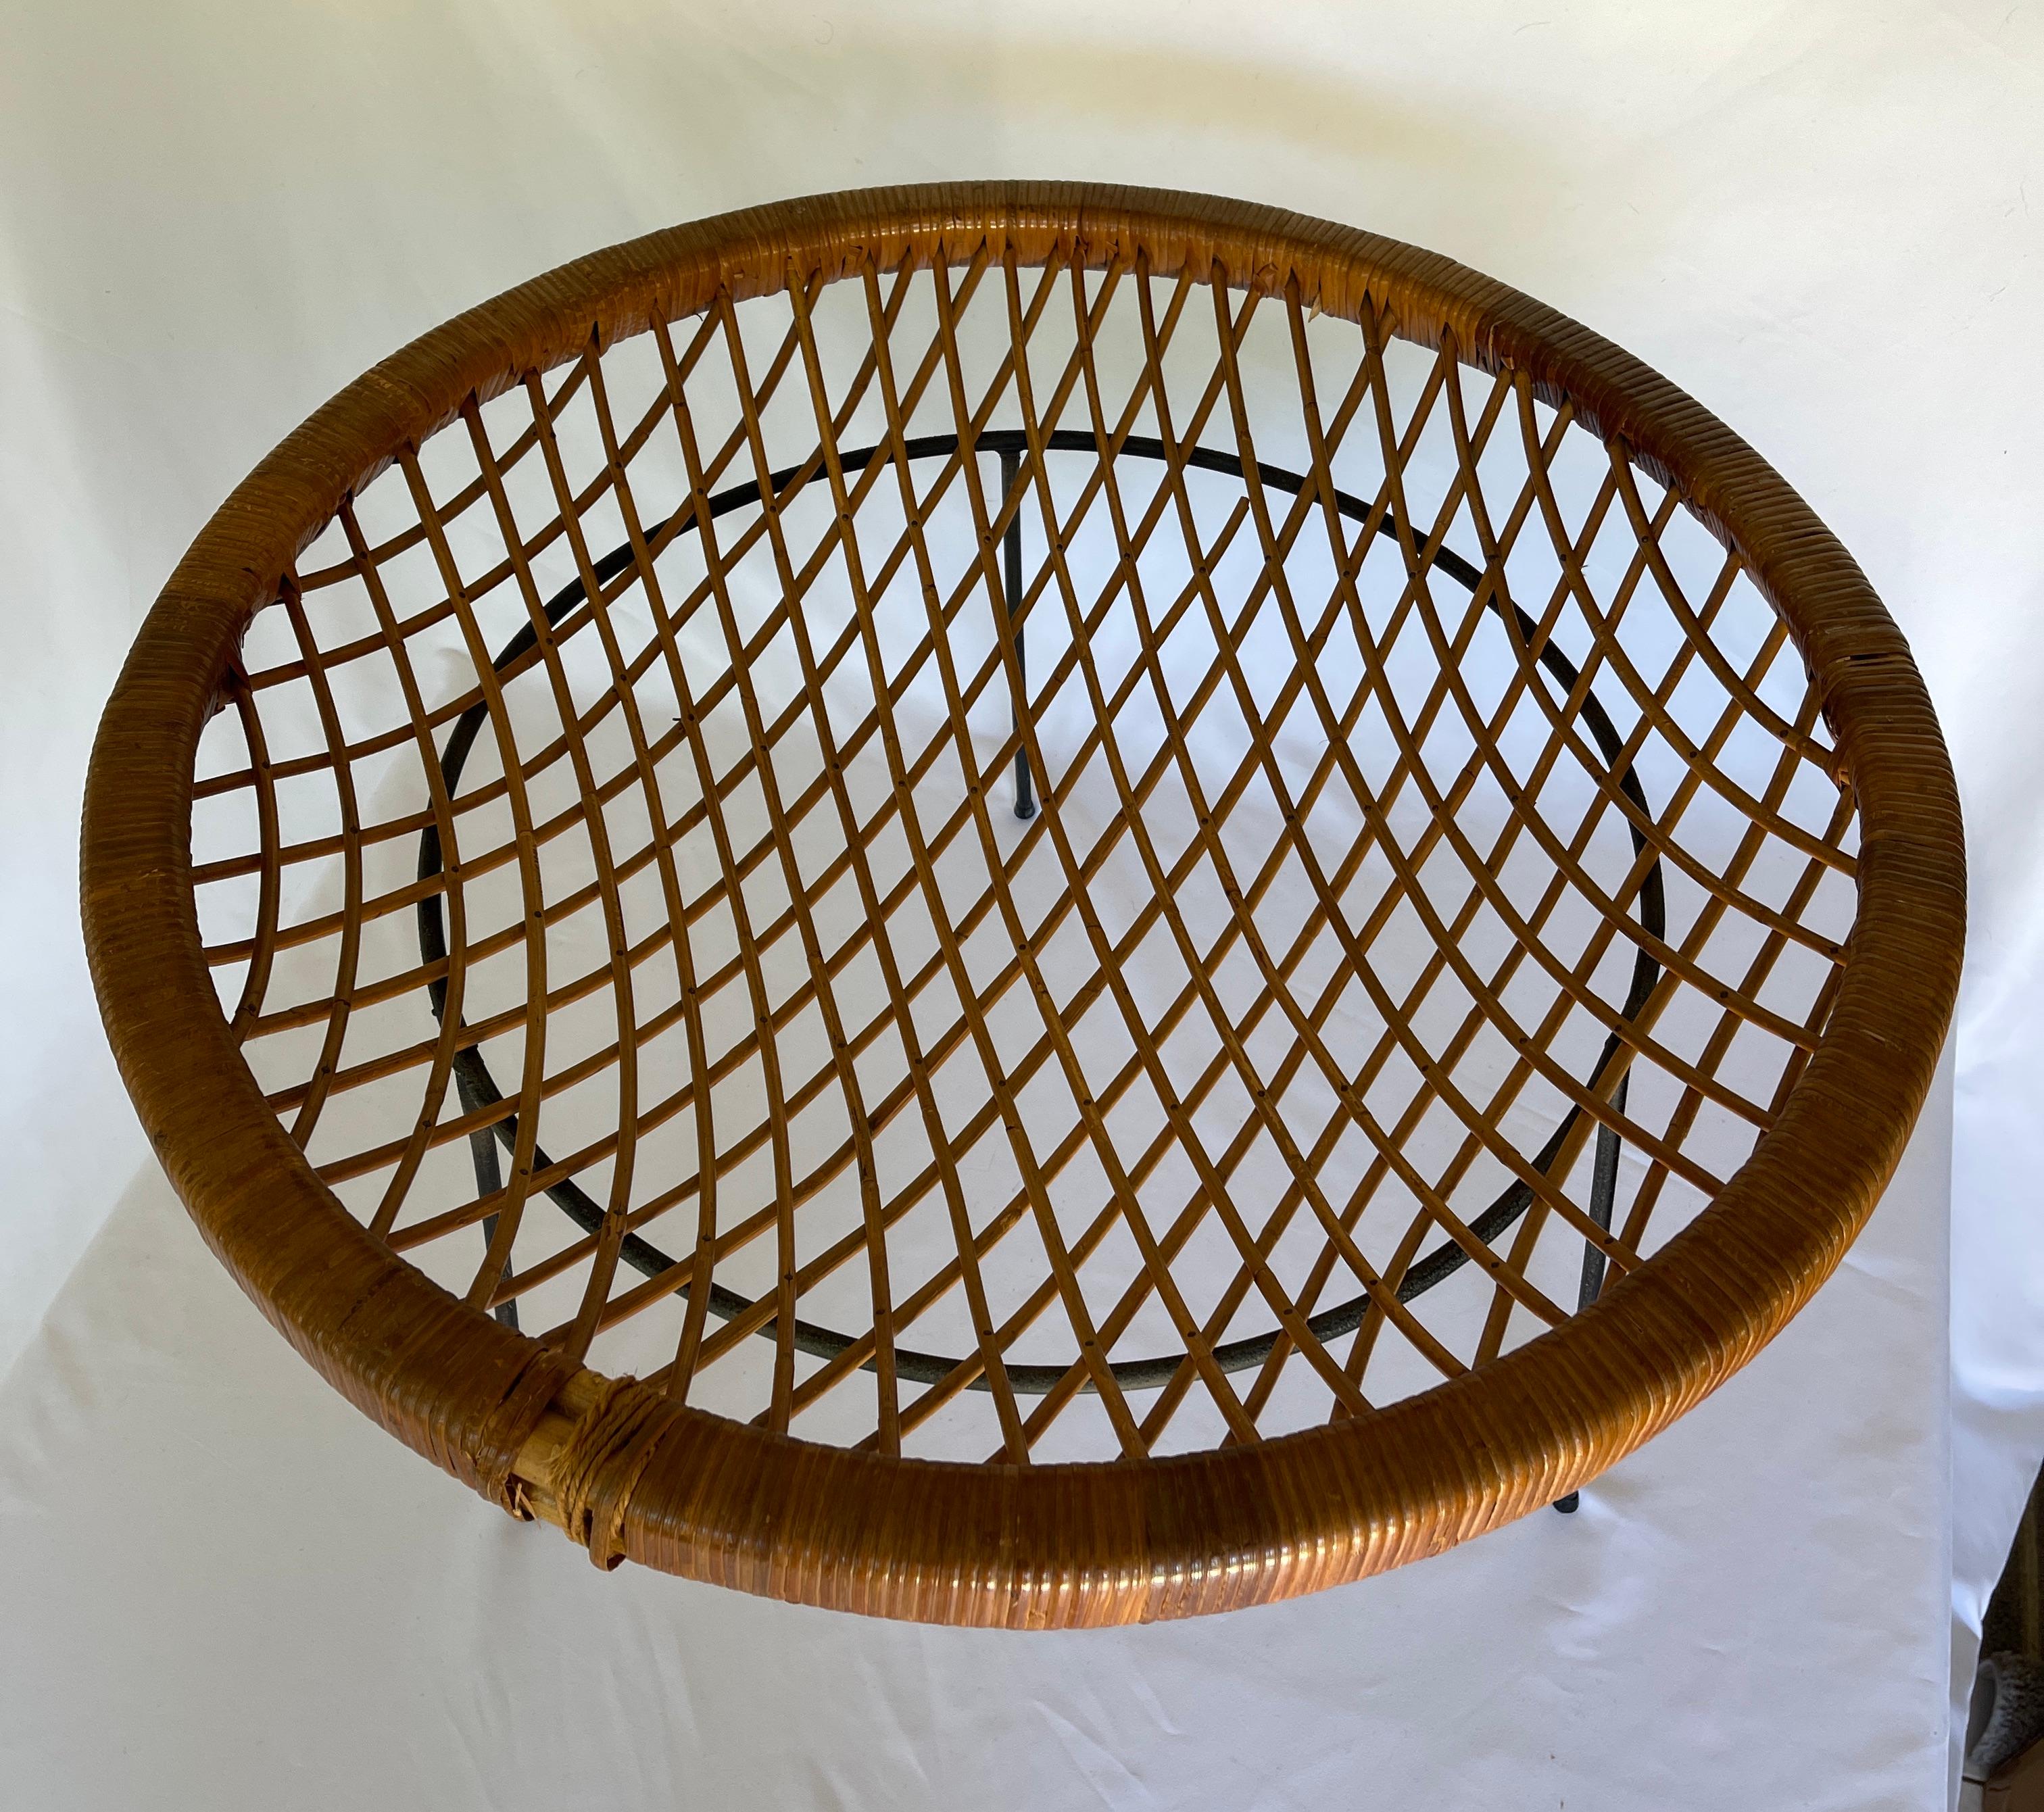 1950's rattan catch all table sits on circular Iron base with three legs. 
Rattan table top measures 27.5